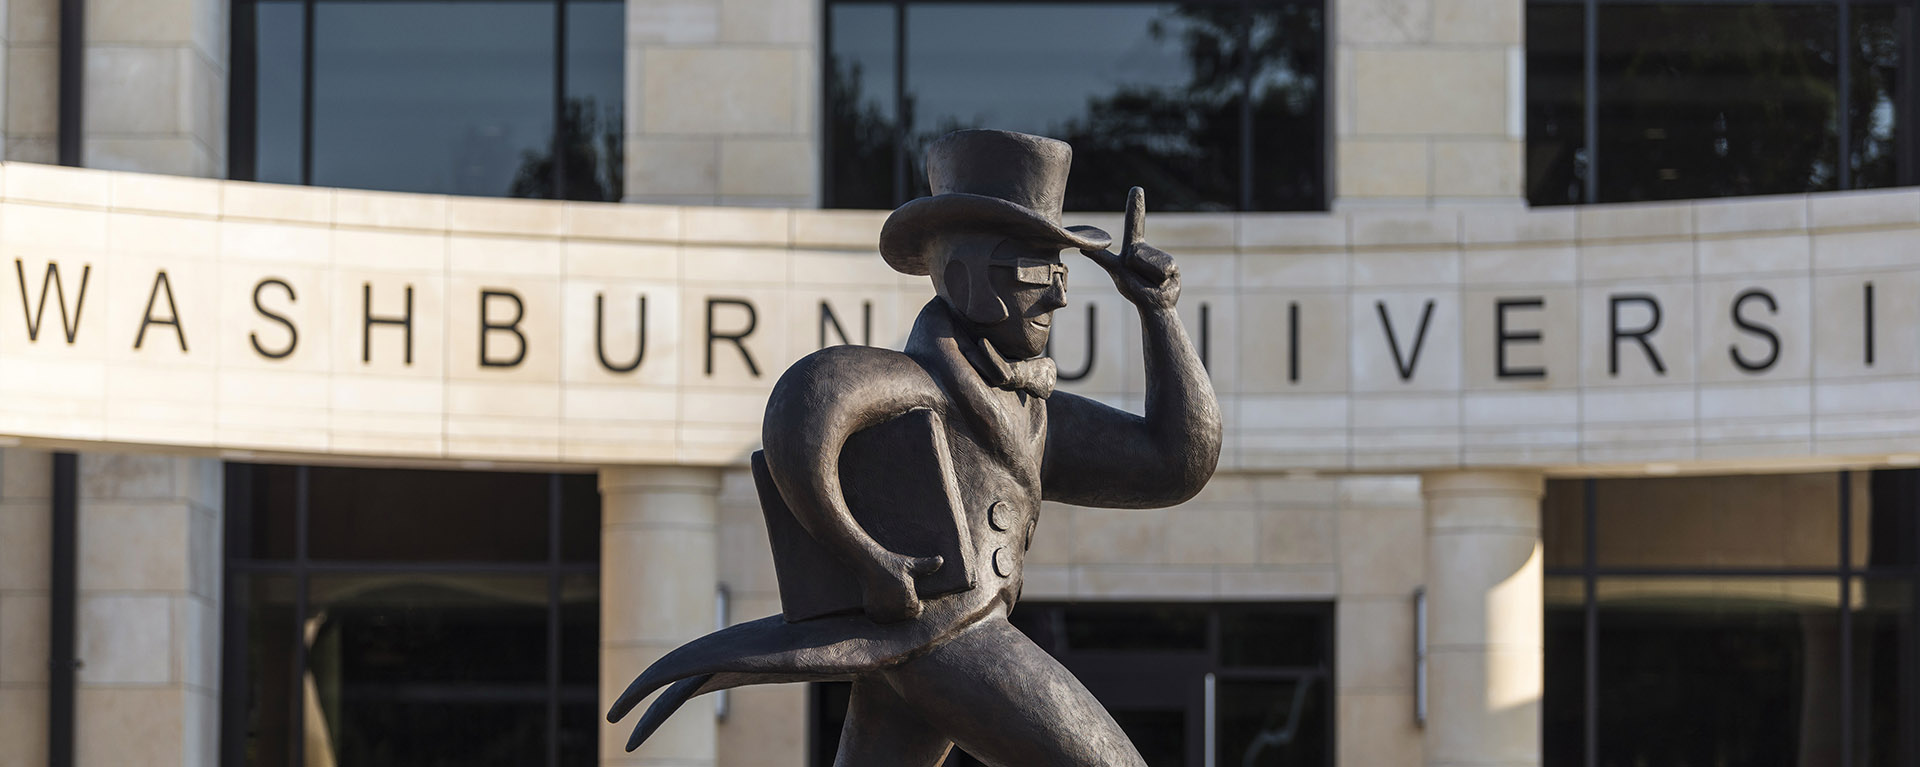 Image of Ichabod statue in front of Morgan Hall, with Washburn University sign behind it